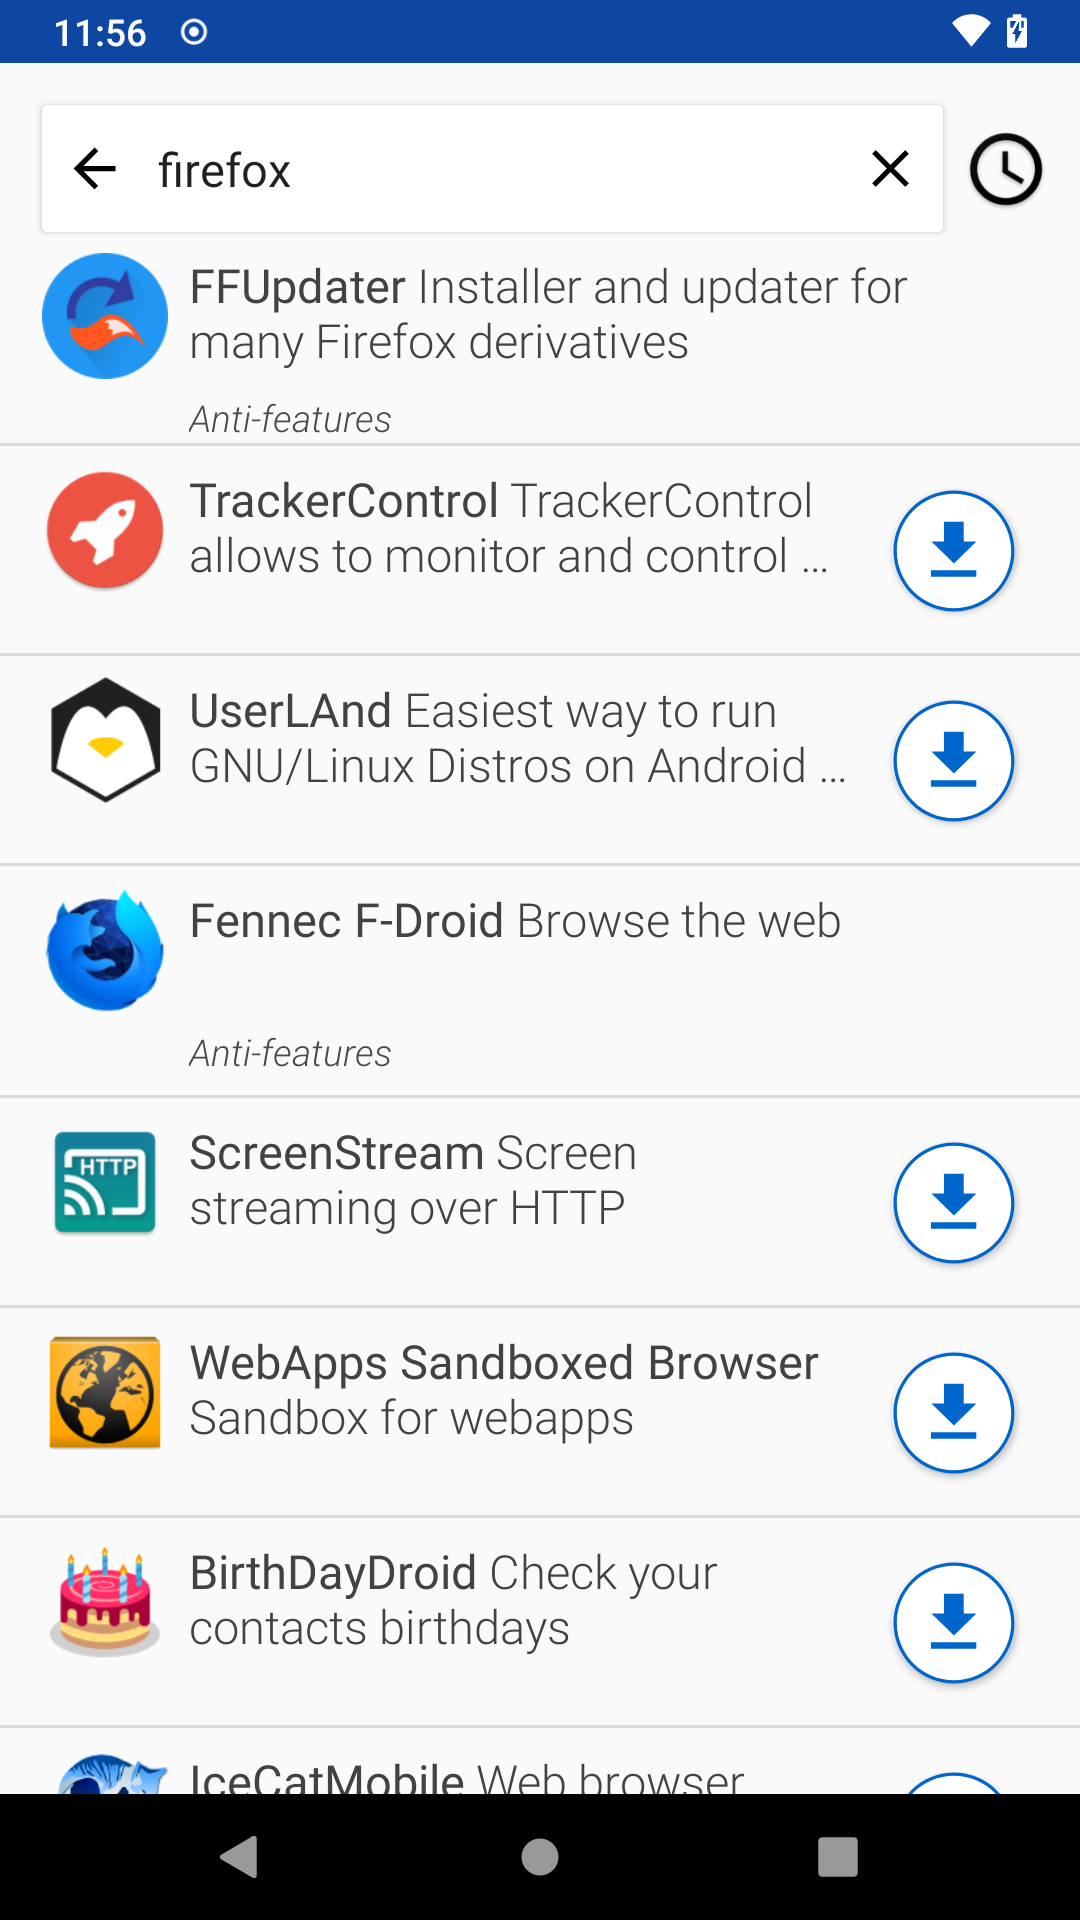 Search results for Firefox on F-Droid